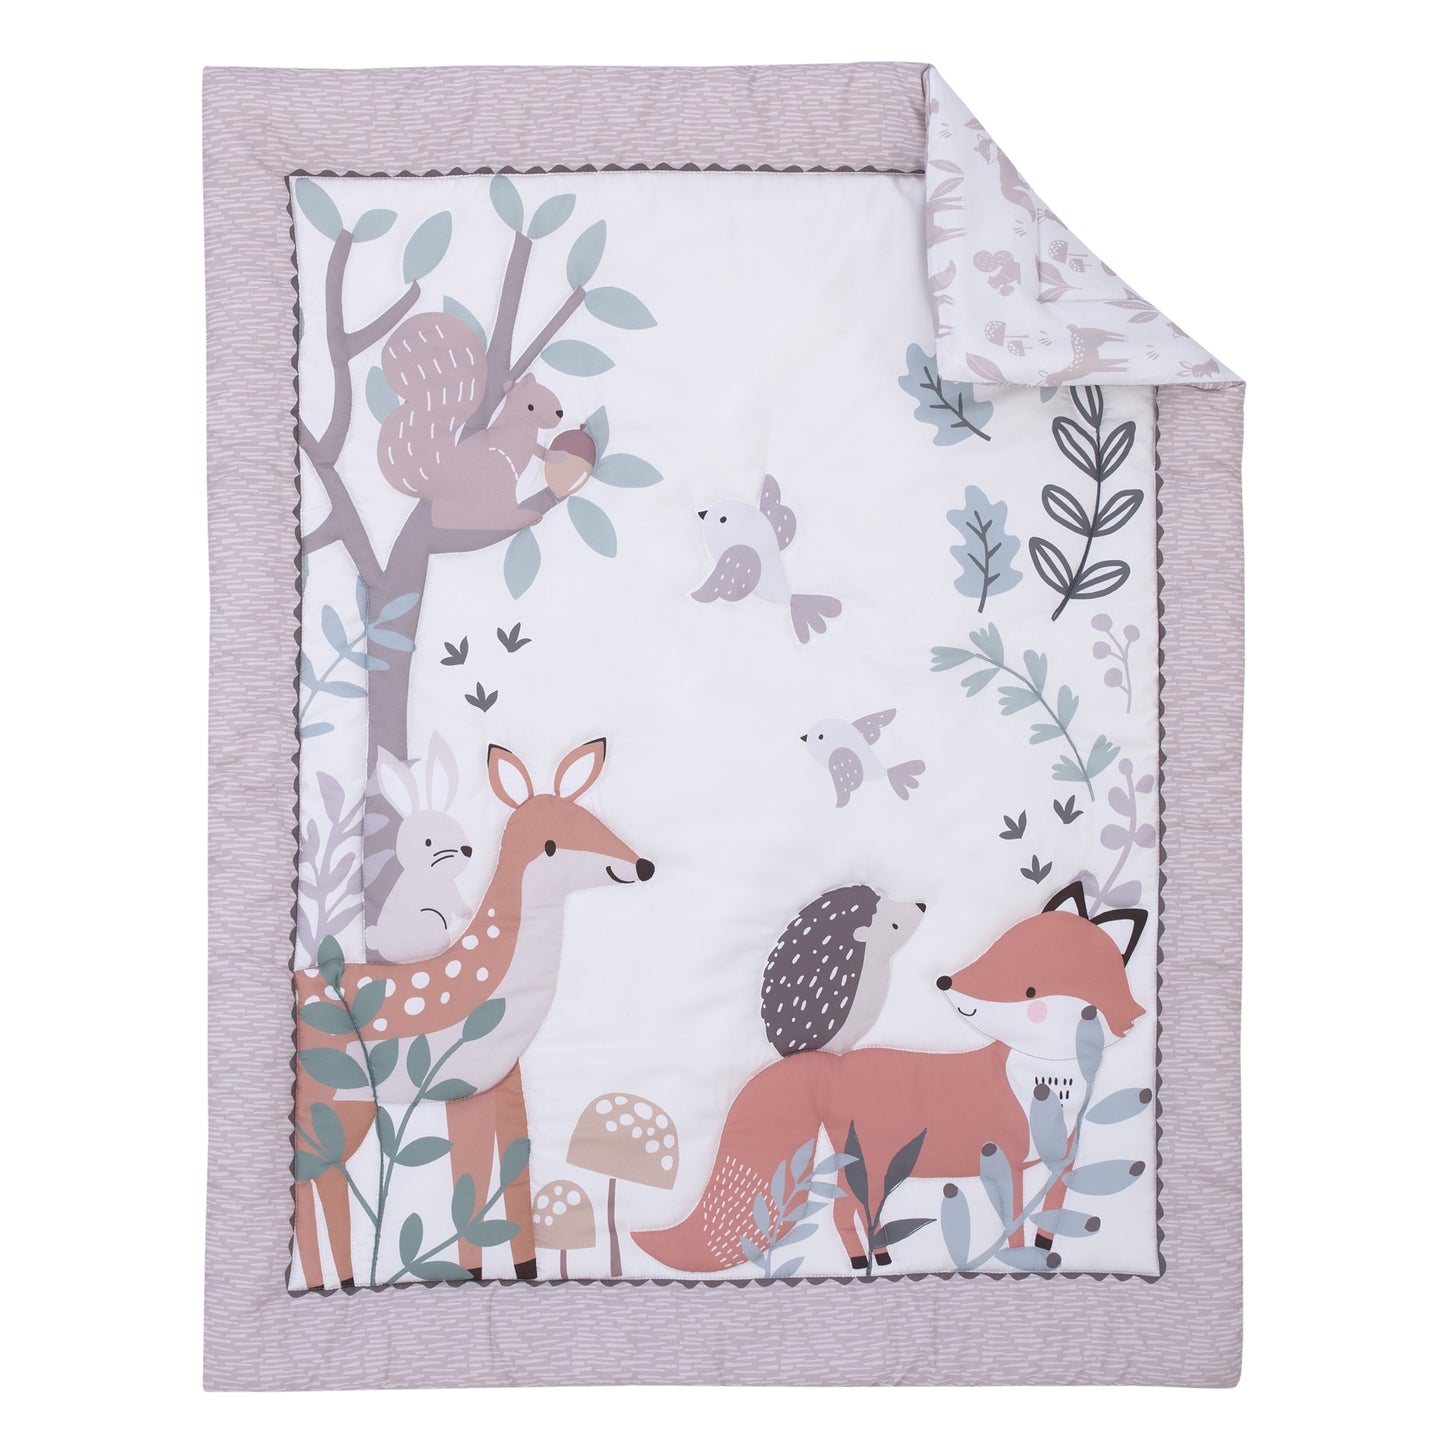 Little Love by NoJo Woodland Meadow Taupe, Sage and White, Fox, Deer, and Hedgehog 3 Piece Nursery Mini Crib Bedding Set - Mini Comforter, and Two Fitted Mini Crib Sheets